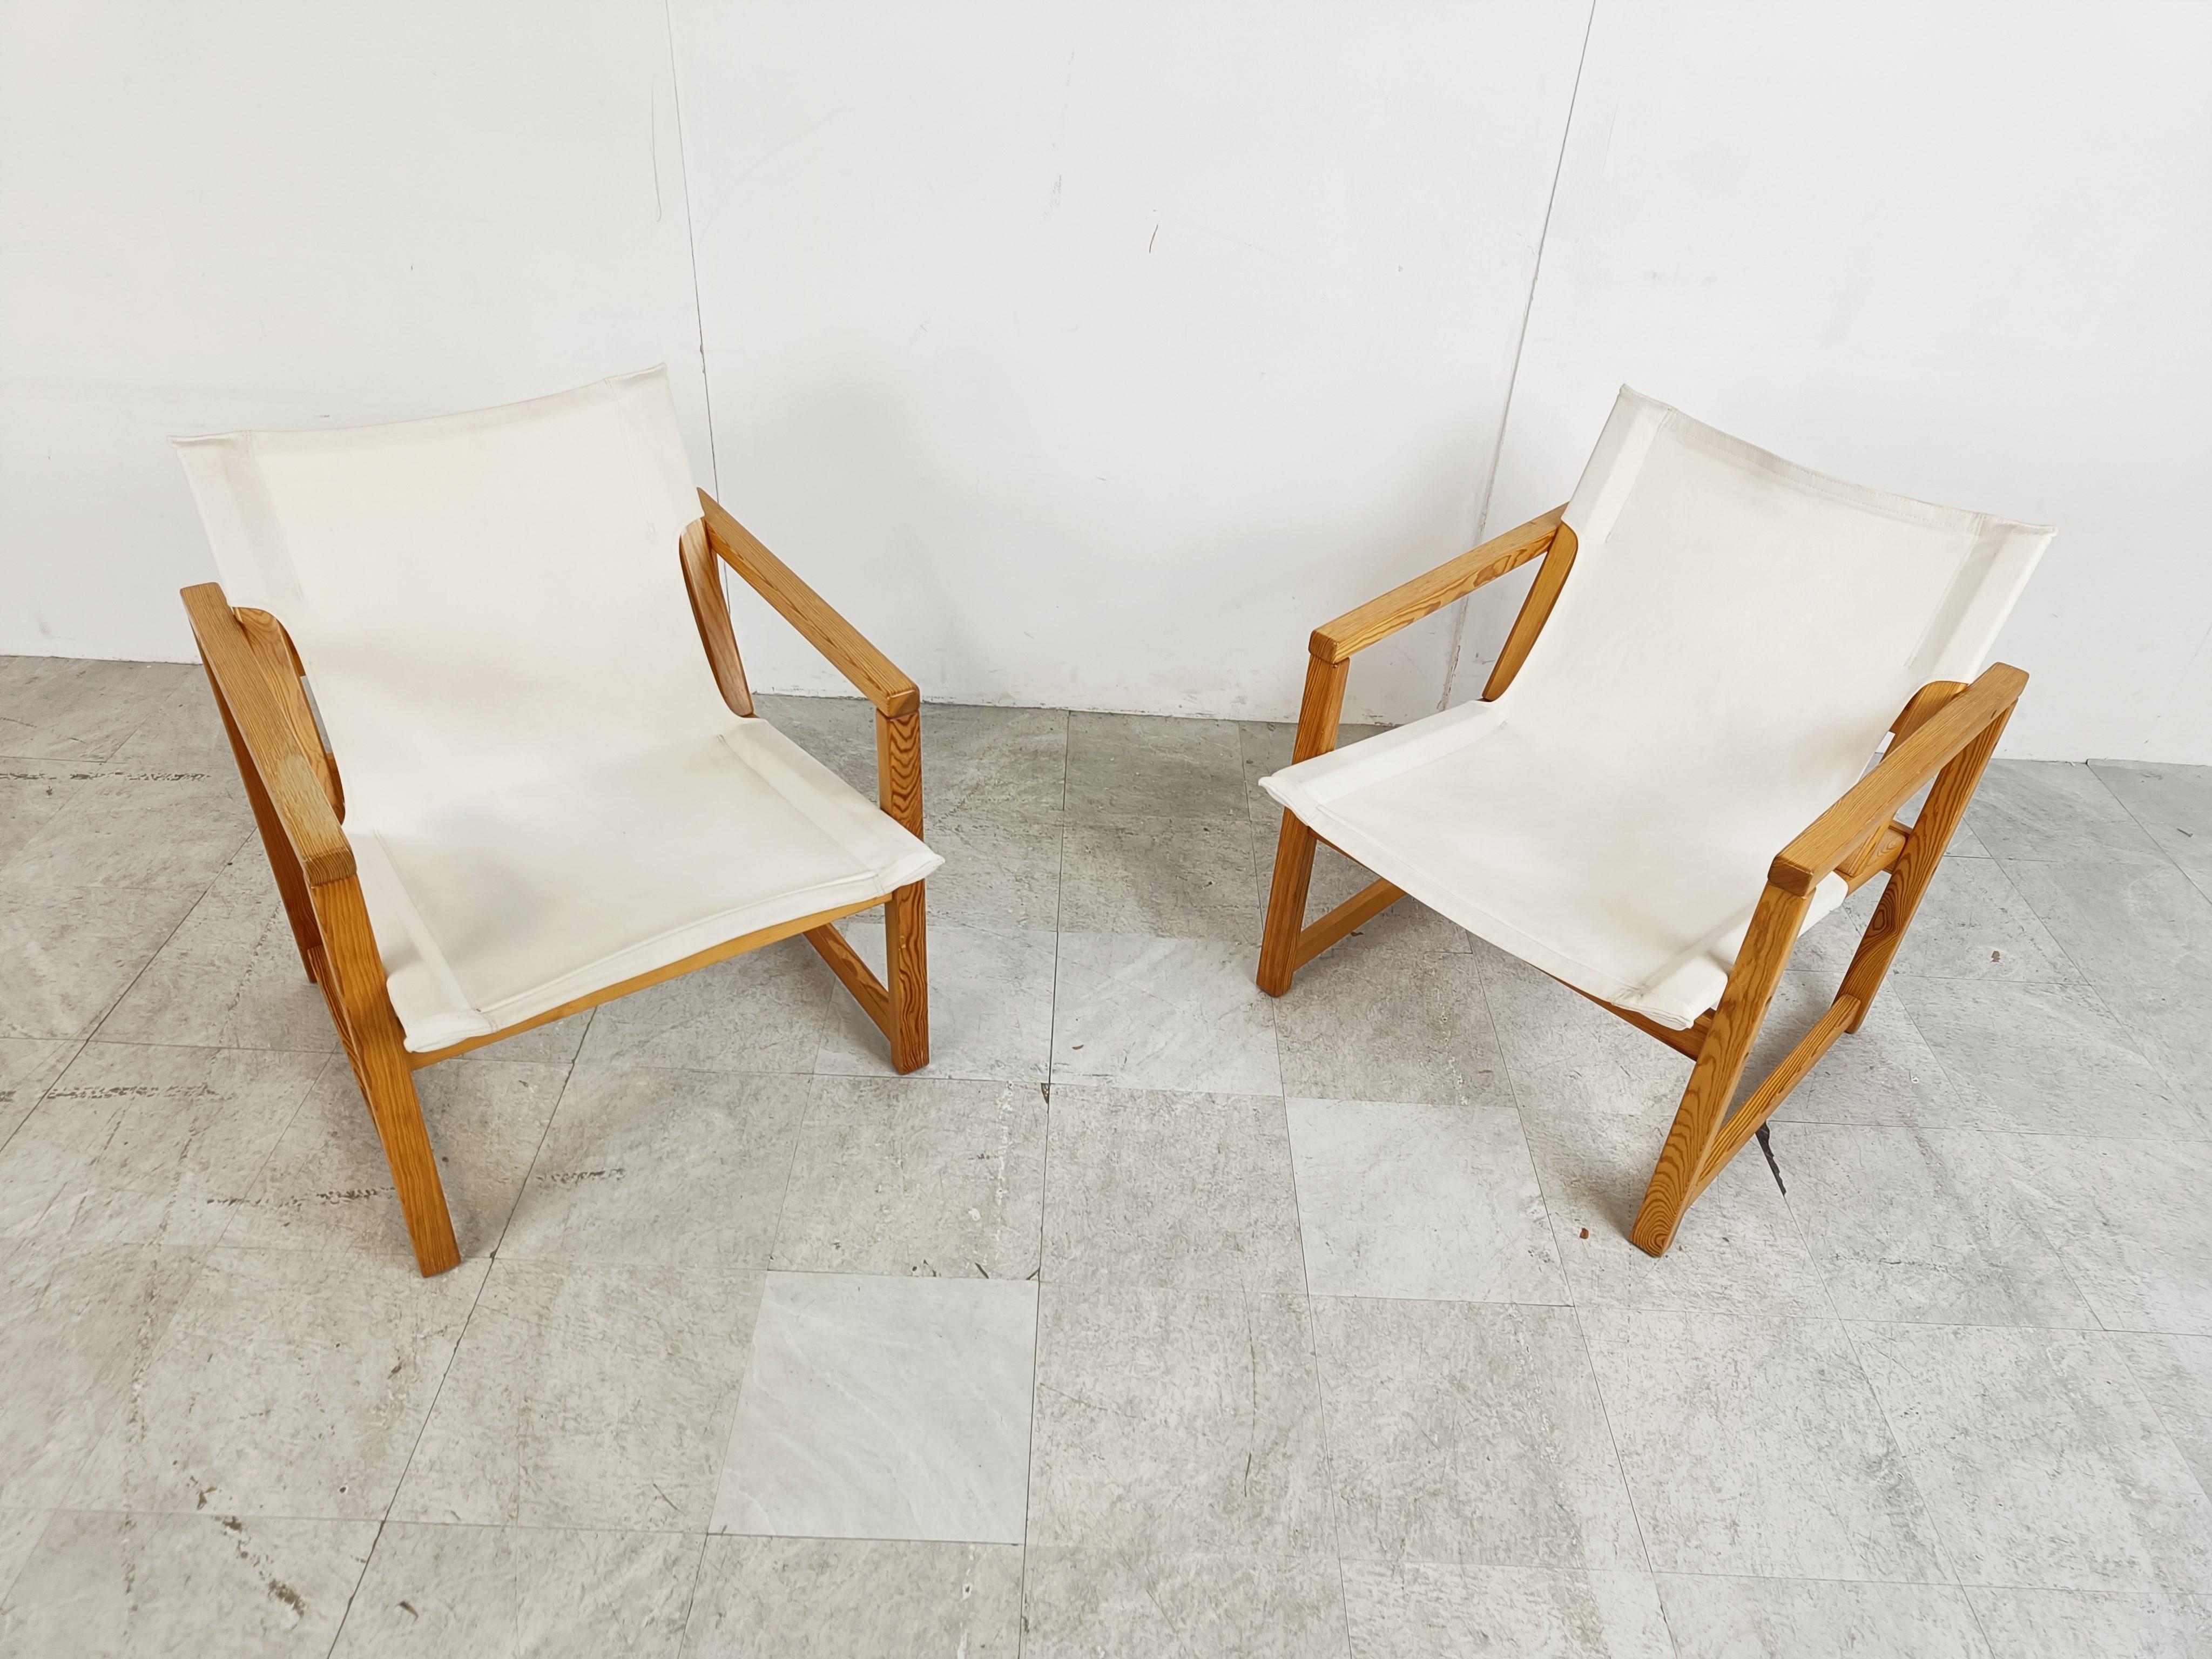 Set of 2 safari chairs with a nordic pine wood frame and white canvas fabric upholstery.

The chairs have a timeless design with a sturdy frame.

1980s - Sweden

Good condition

Dimensions:
Height: 74cm/29.13